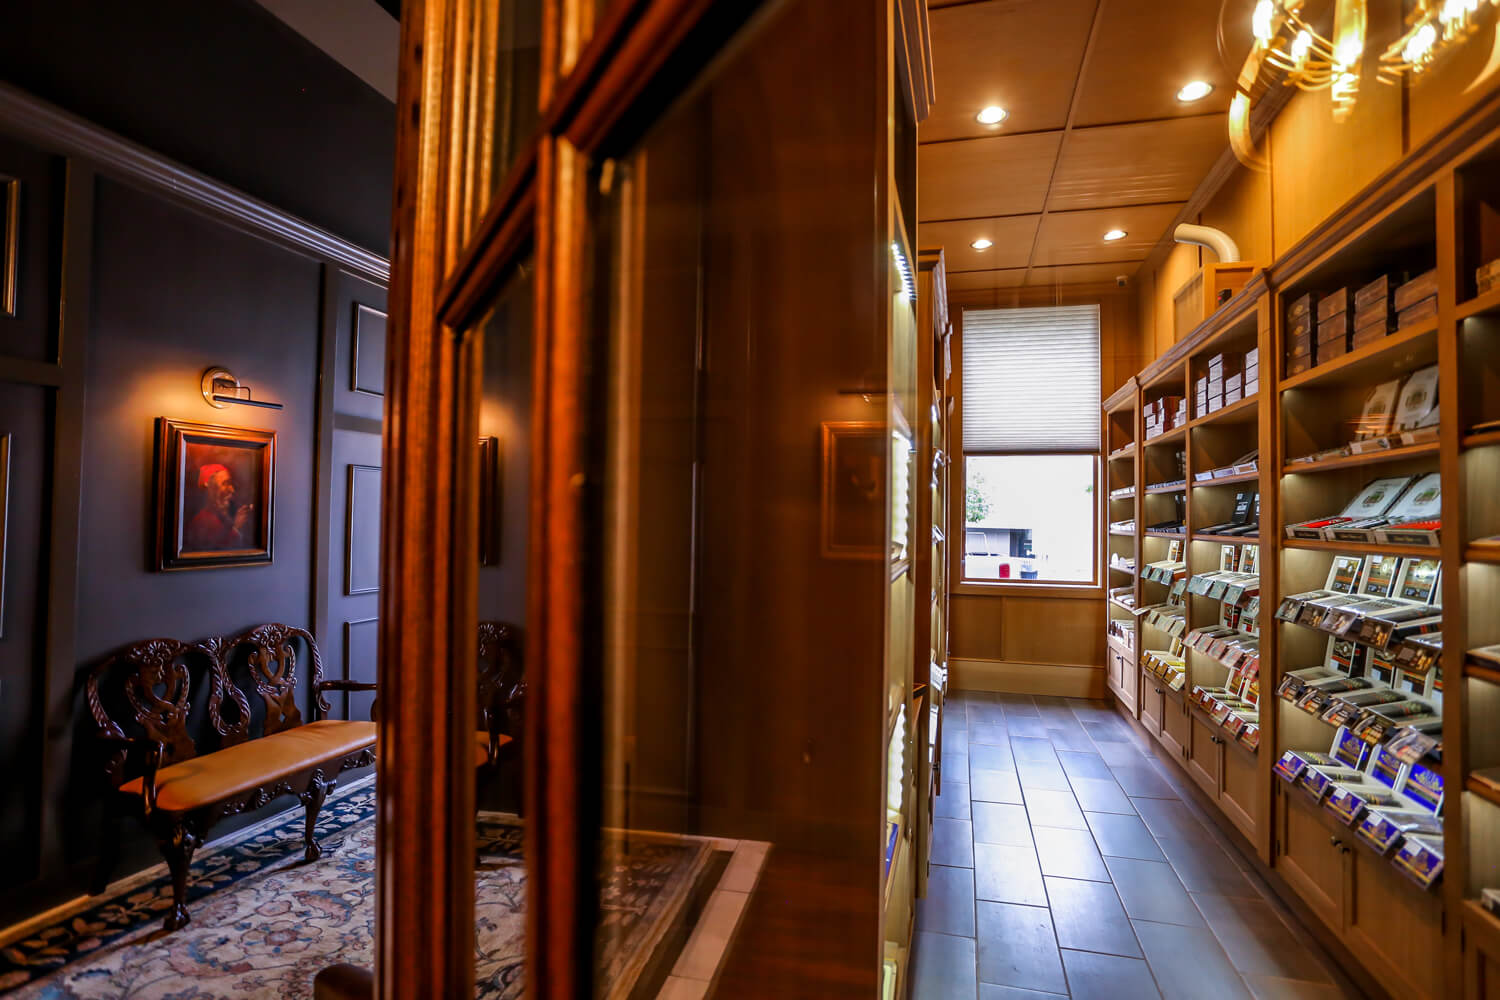 Cigar Store - Humidor and Entrance - Designed by Foshee Architecture